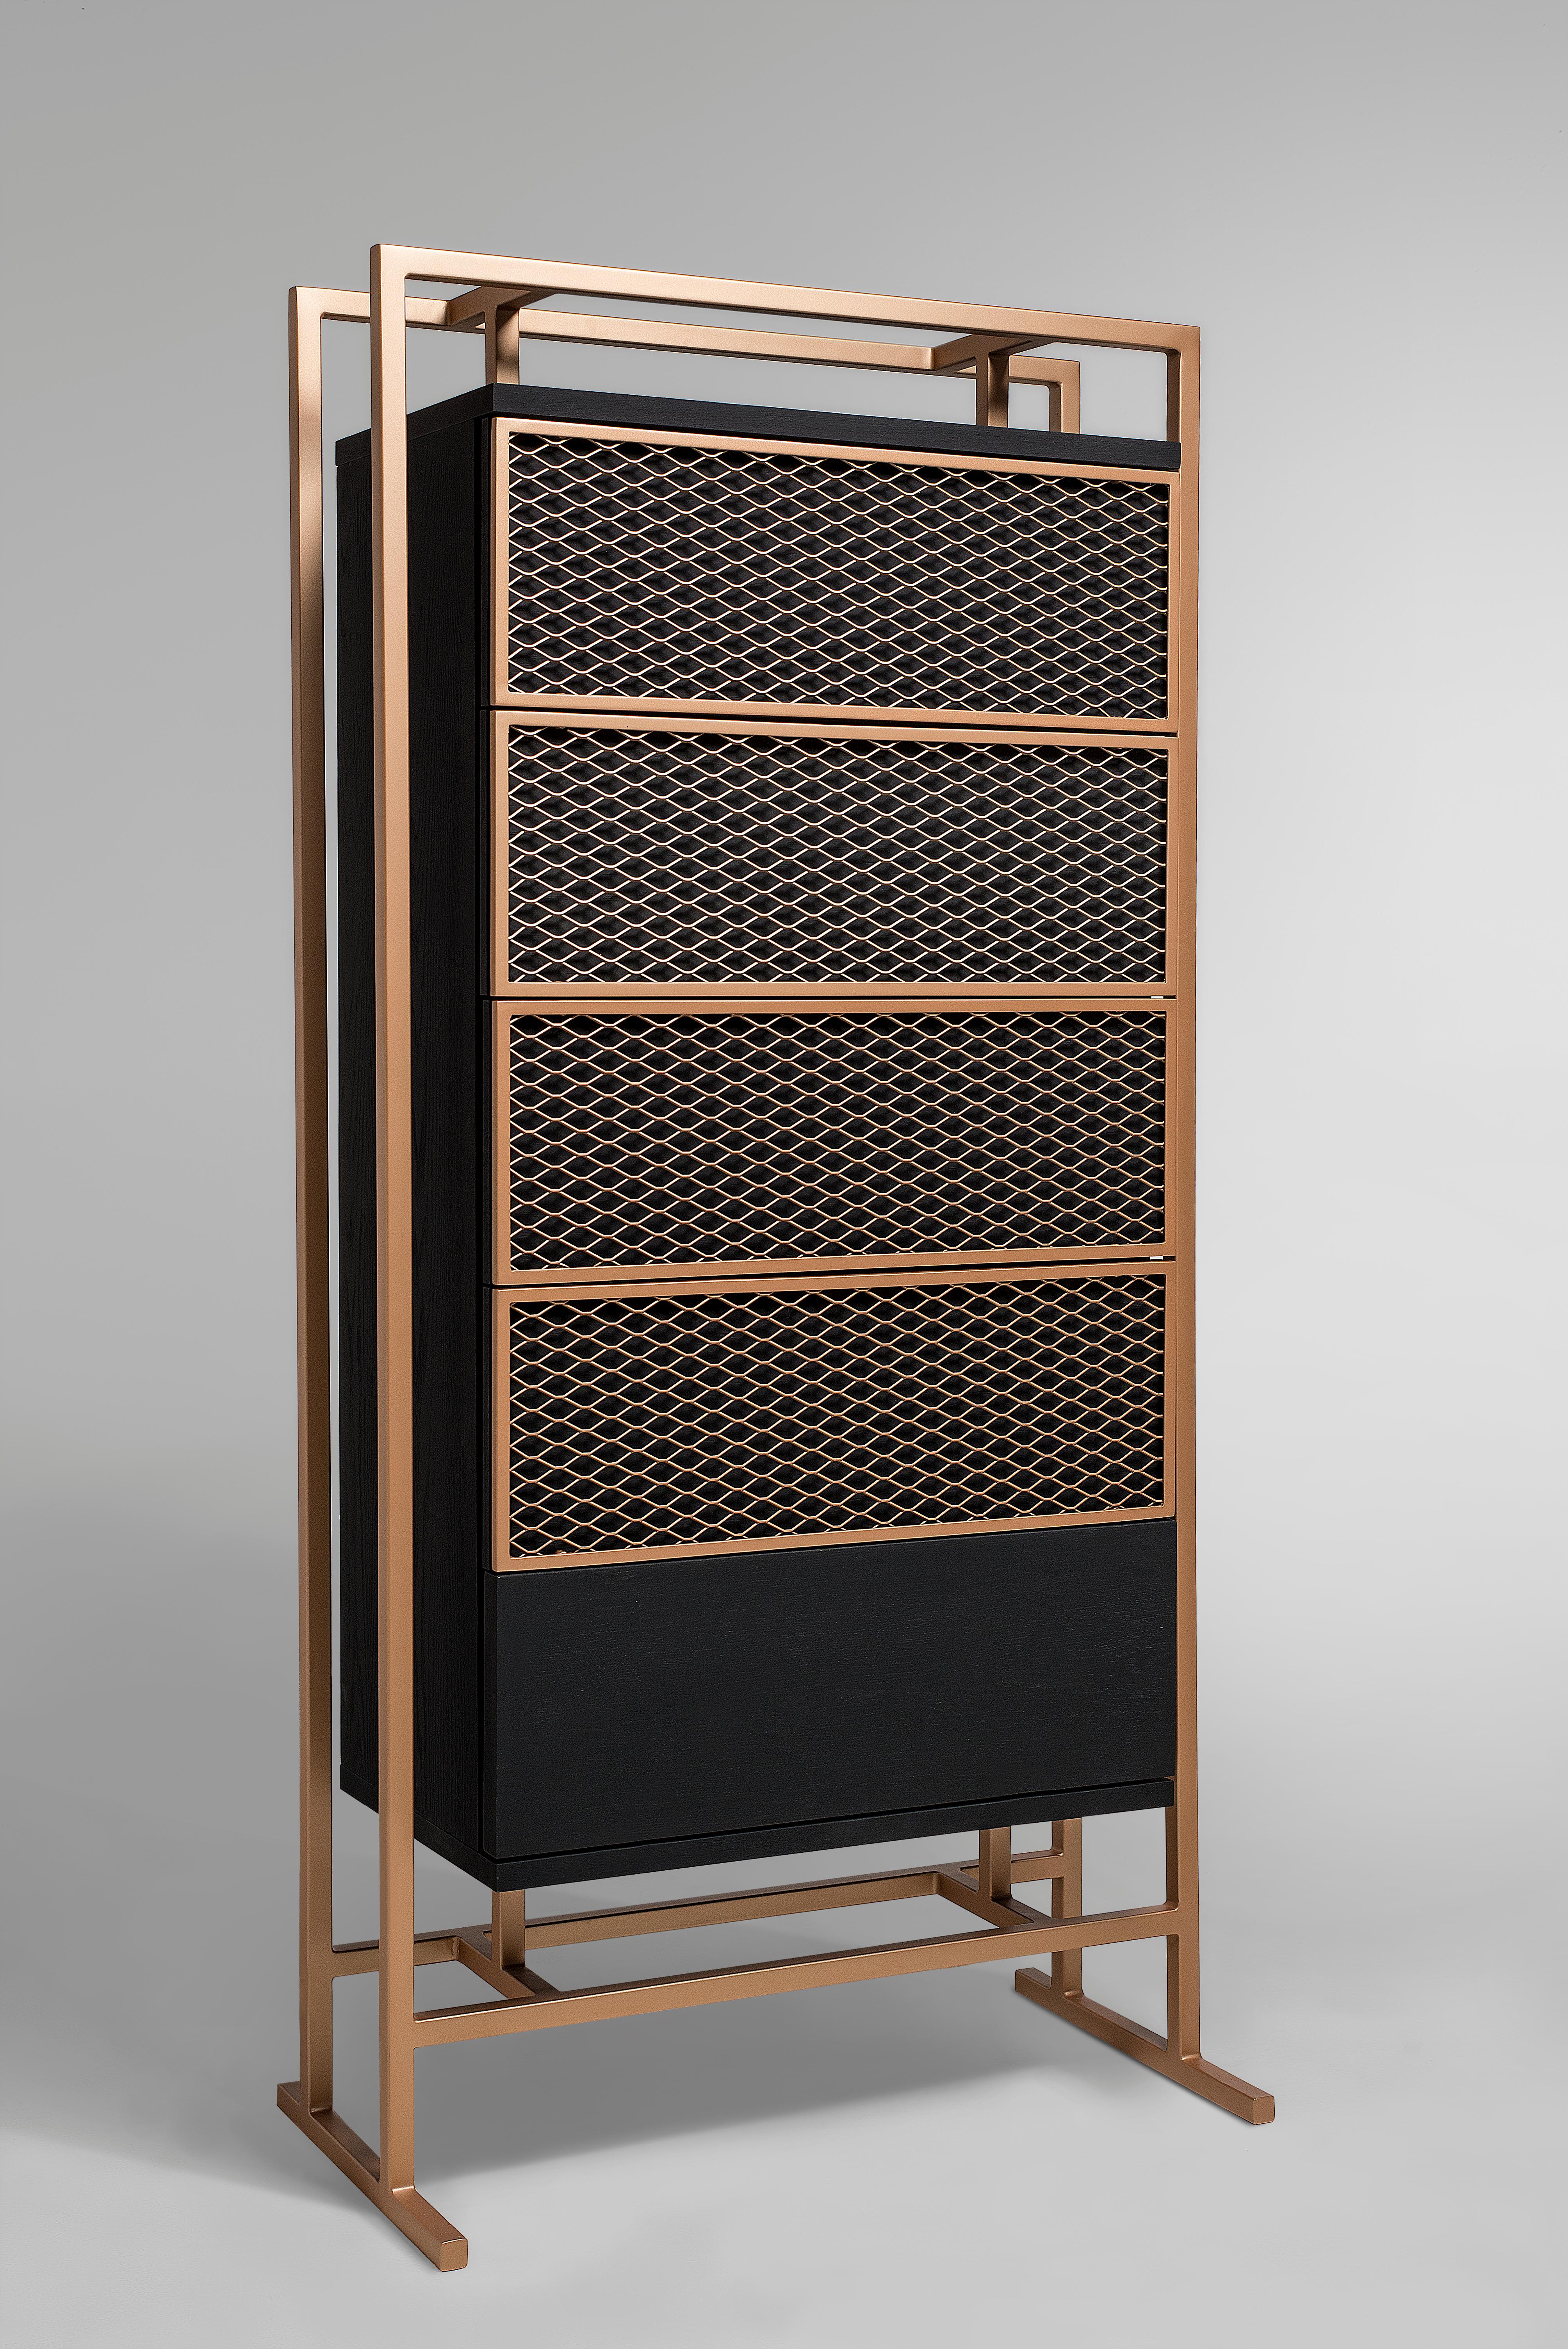 Excellent in size and style, the Ezera drawer is a perfect fit for any living room, narrow corridor and entry hall. Fabricated out of wood, metal, and designed by Larissa Batista, this modern cabinet is a master class of design that brings with it